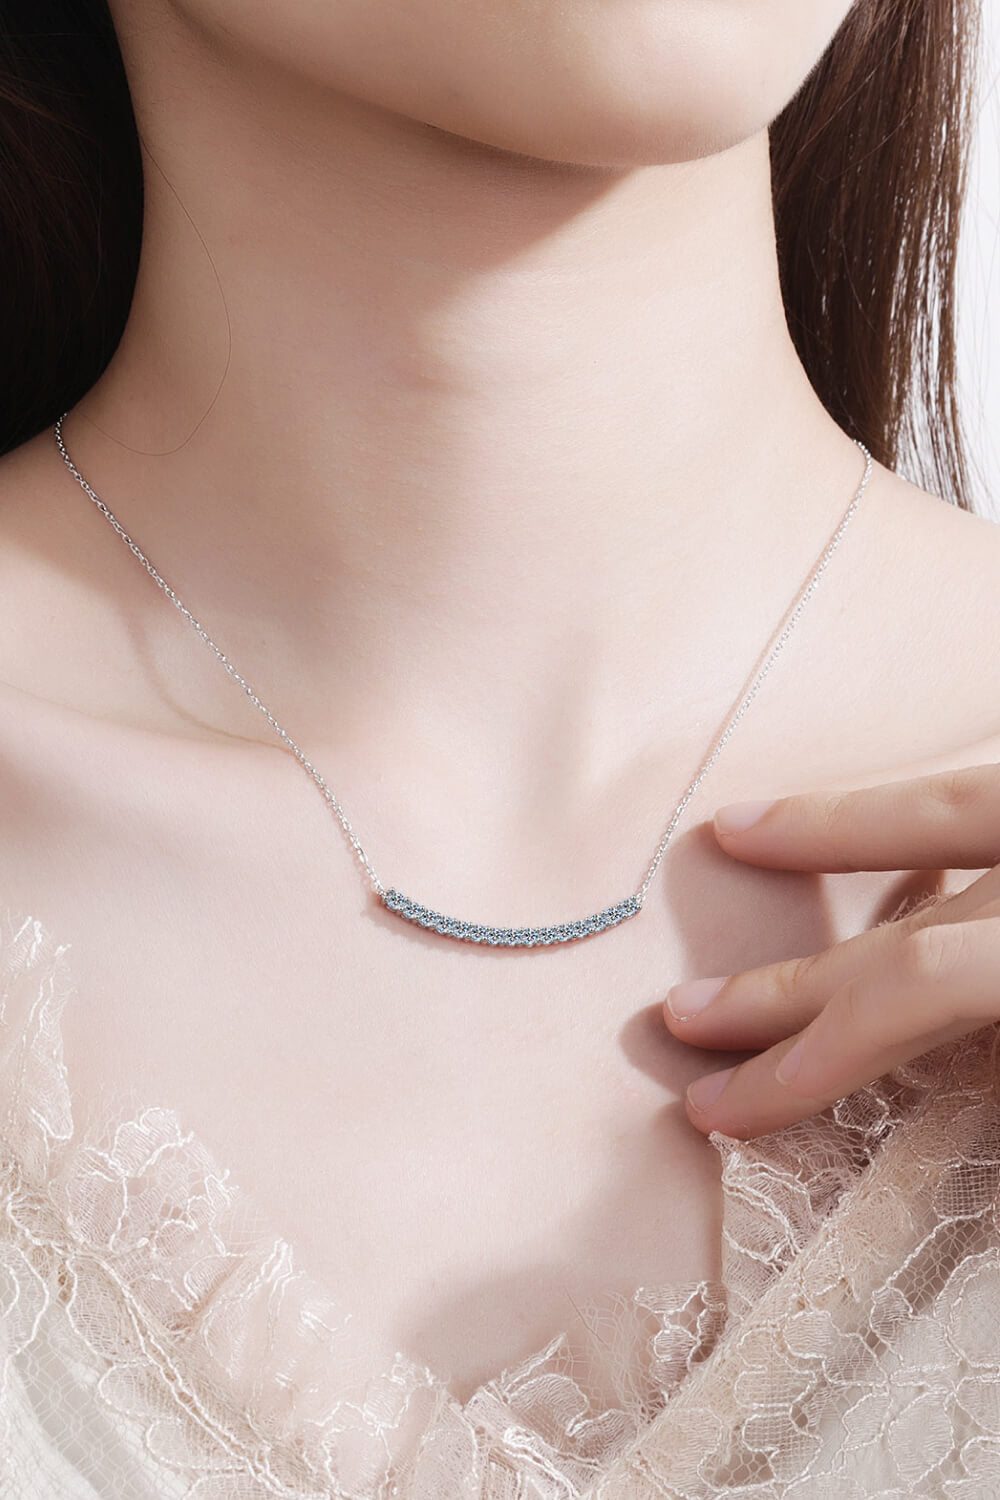 Sterling Silver Curved Bar Necklace - Sharon David's